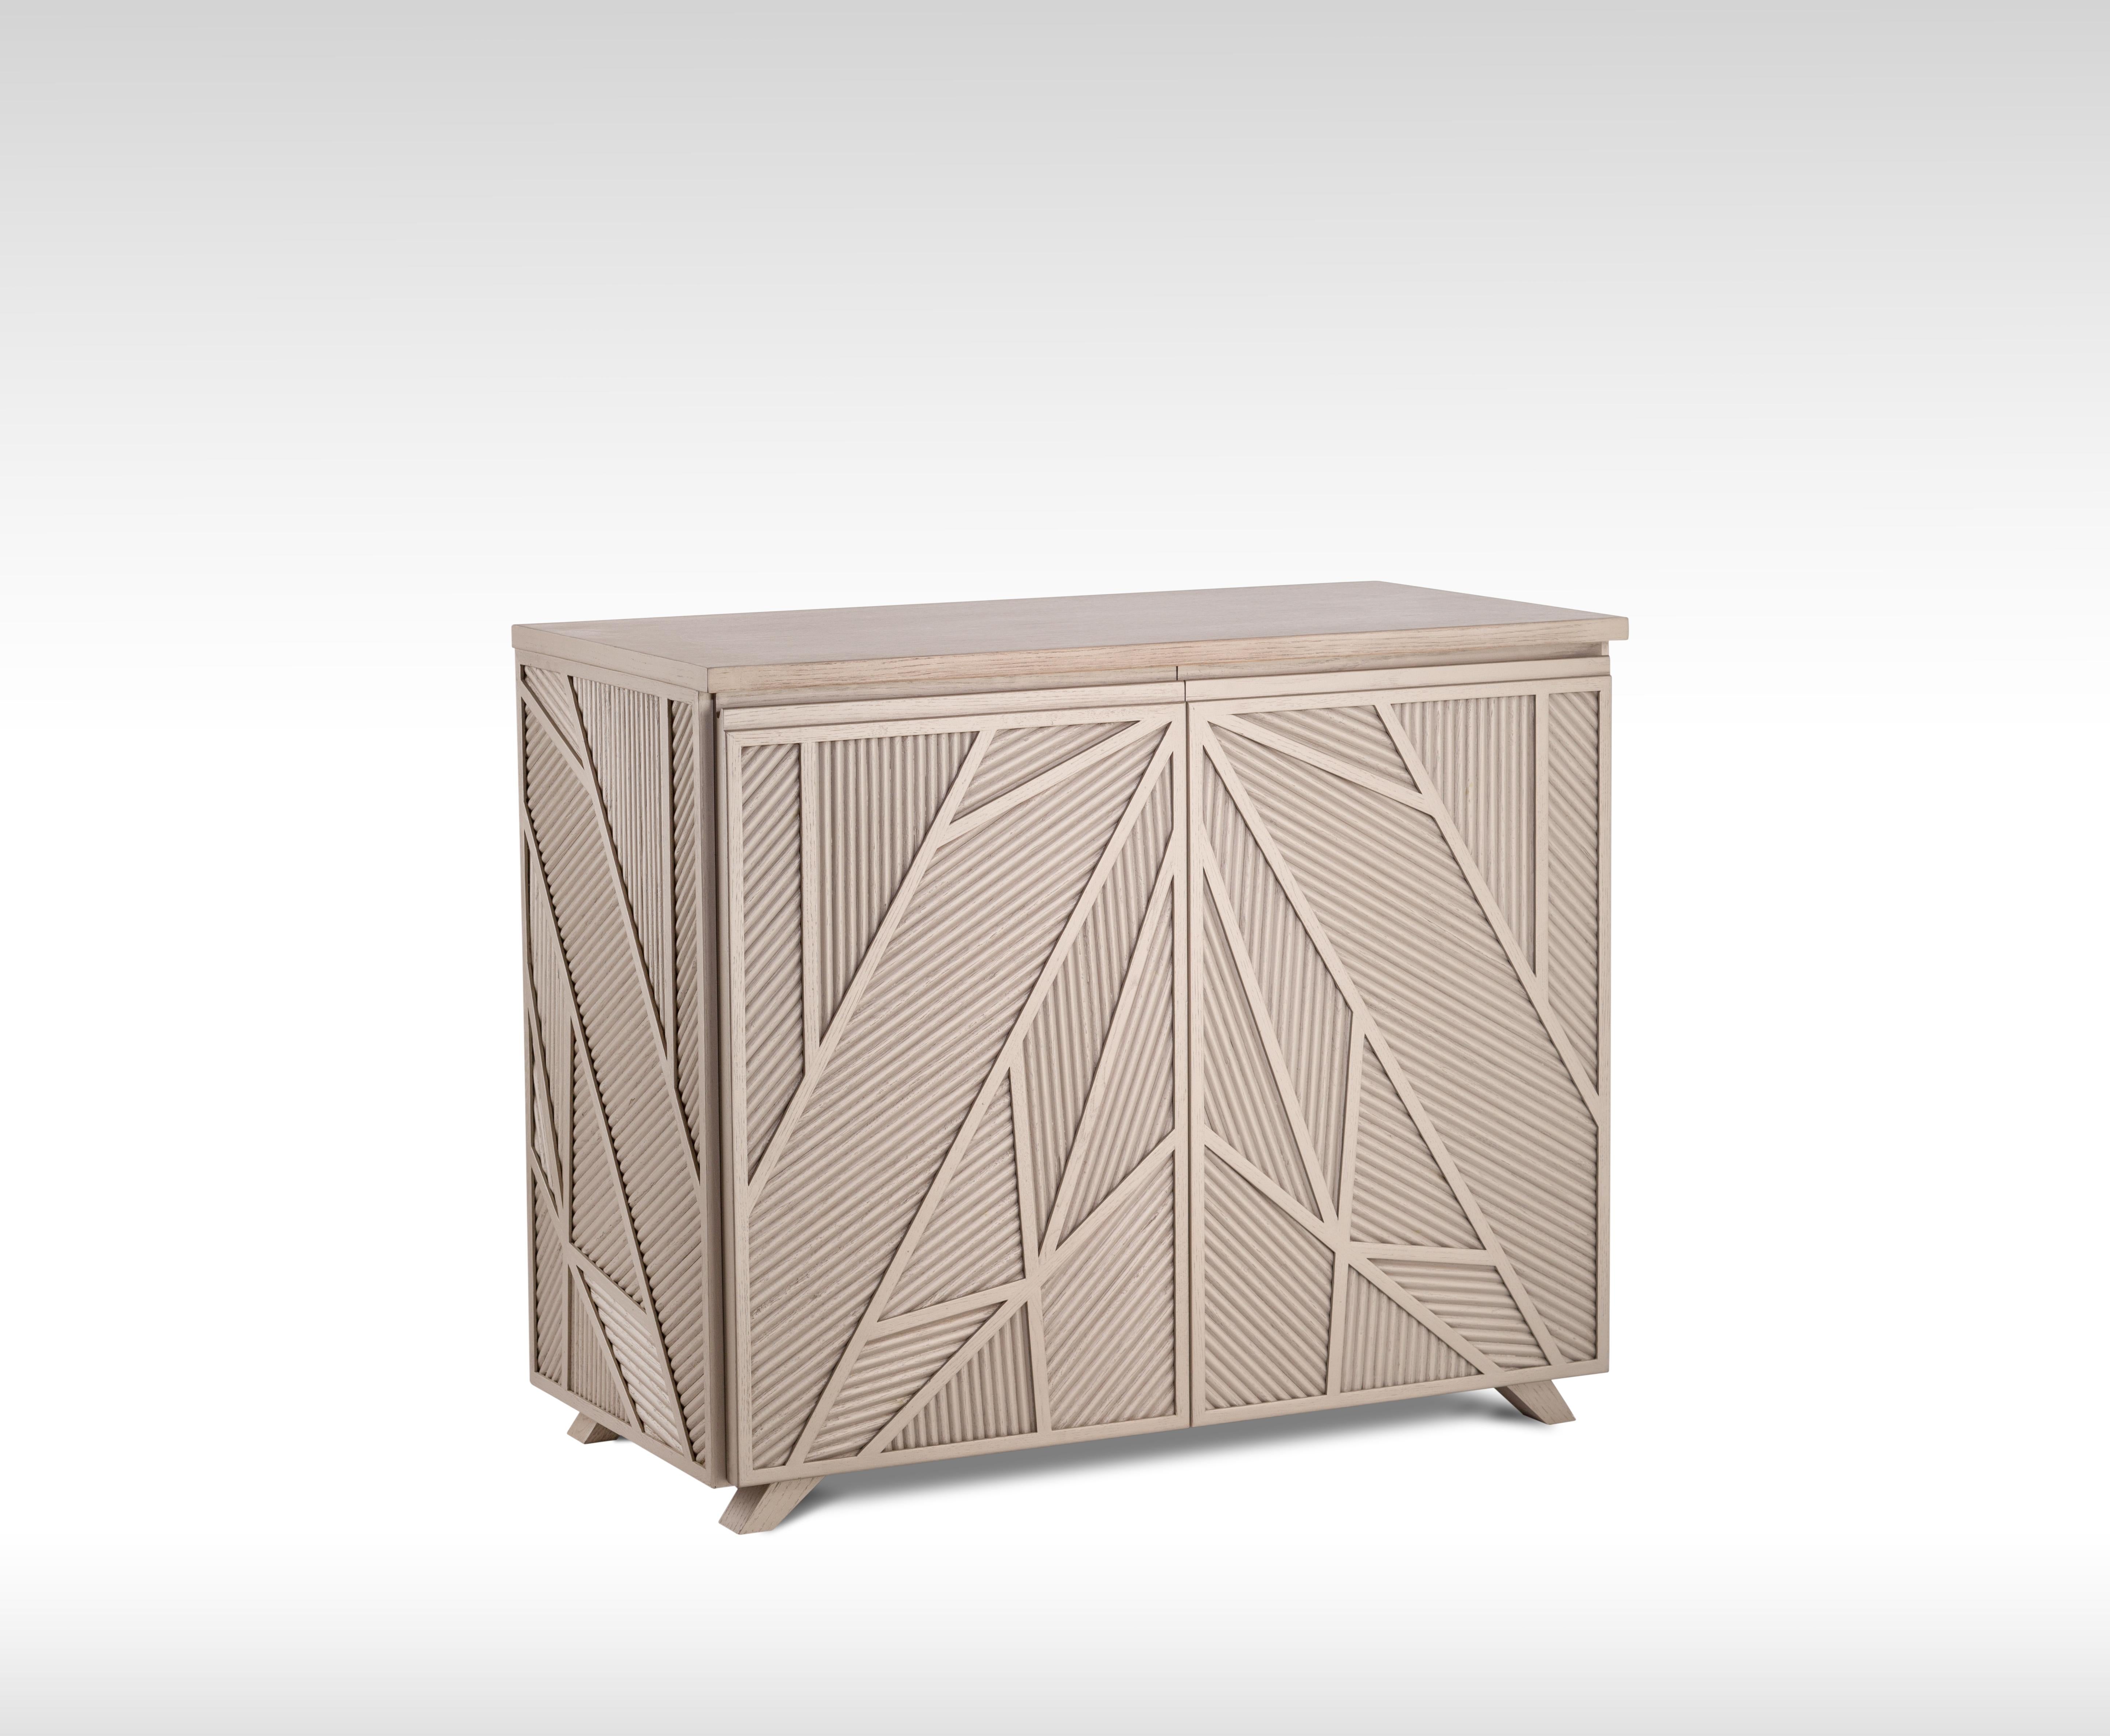 Modern Geometric Oak Sticks Cabinet Inspired from Ancient Egypt Use of Palm Branches